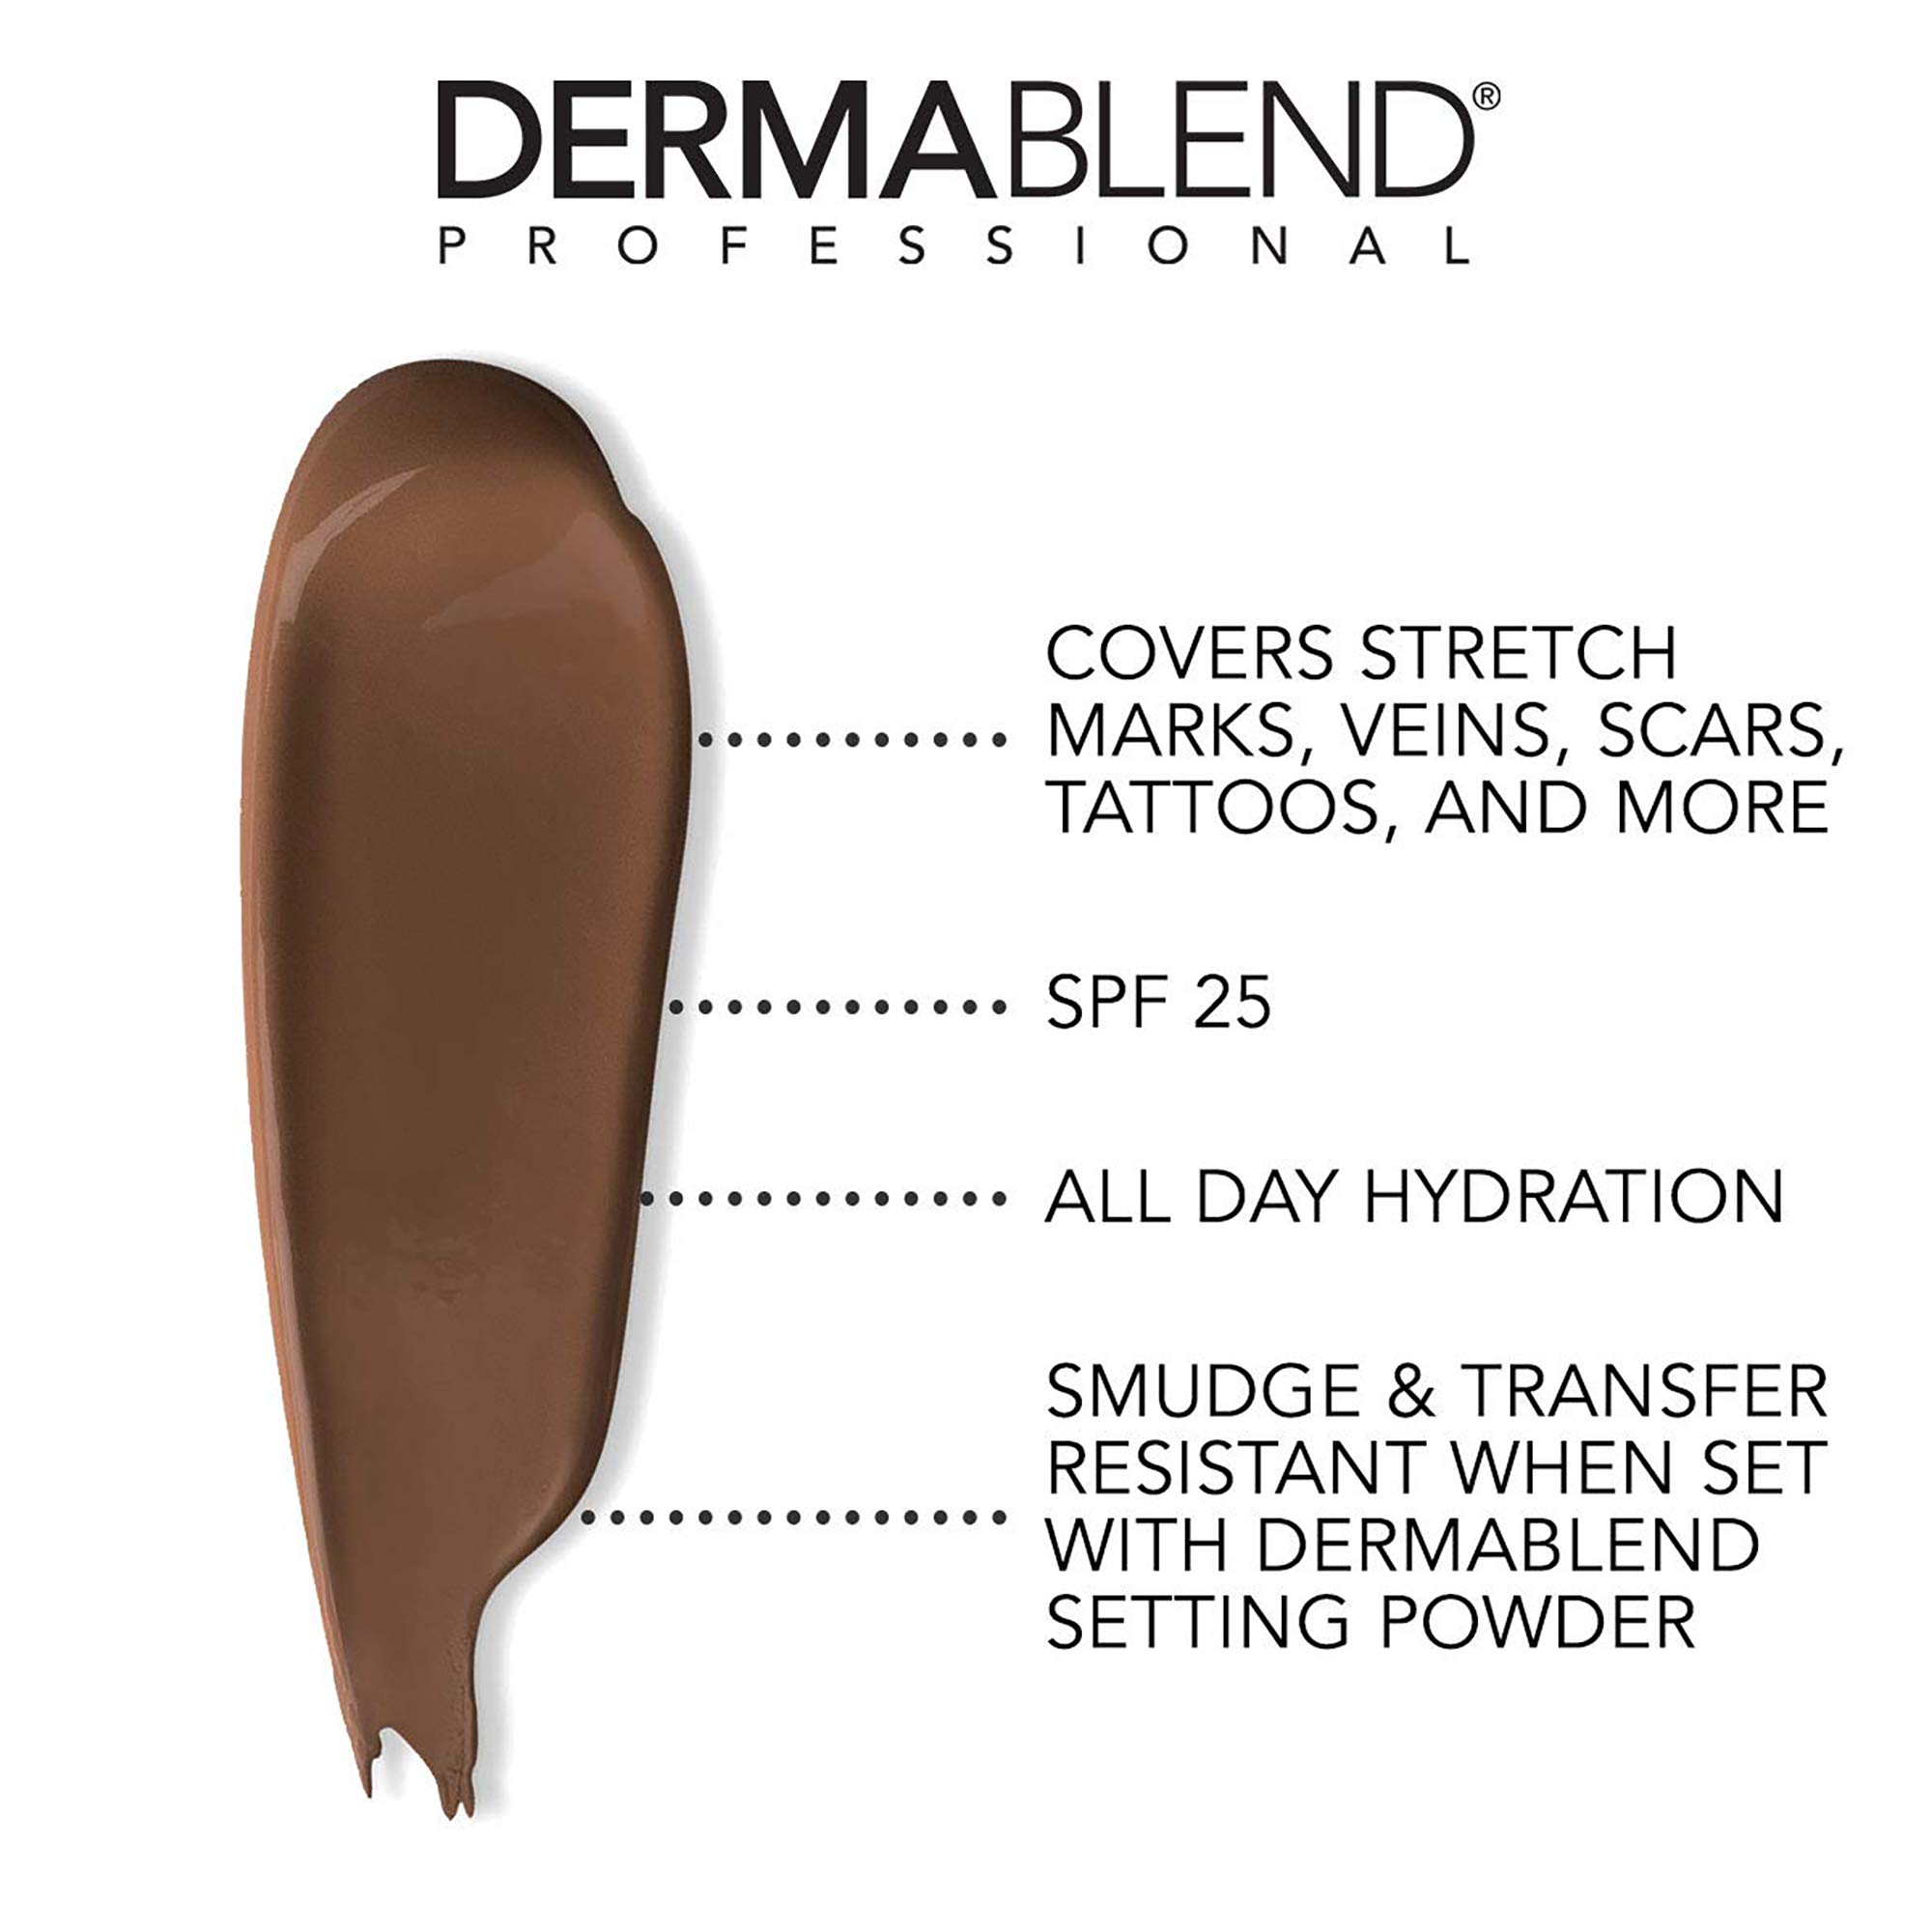 Dermablend Leg and Body Makeup Foundation with SPF 25, 85N Deep Natural, 3.4 Fl. Oz.